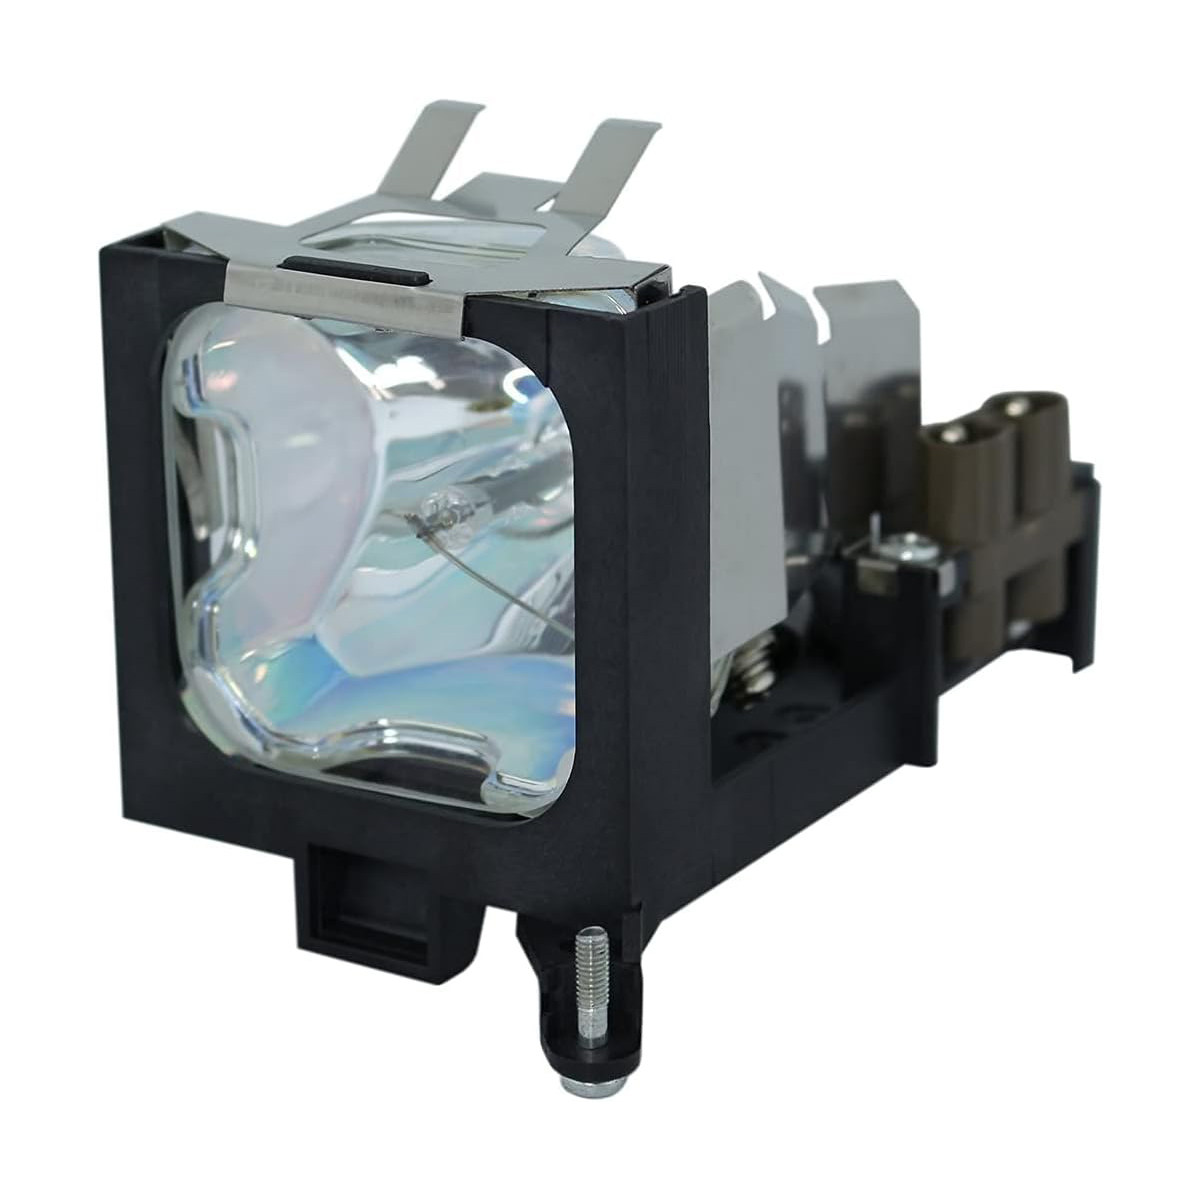 Replacement Projector lamp LV-LP23 For CANON LV-S4